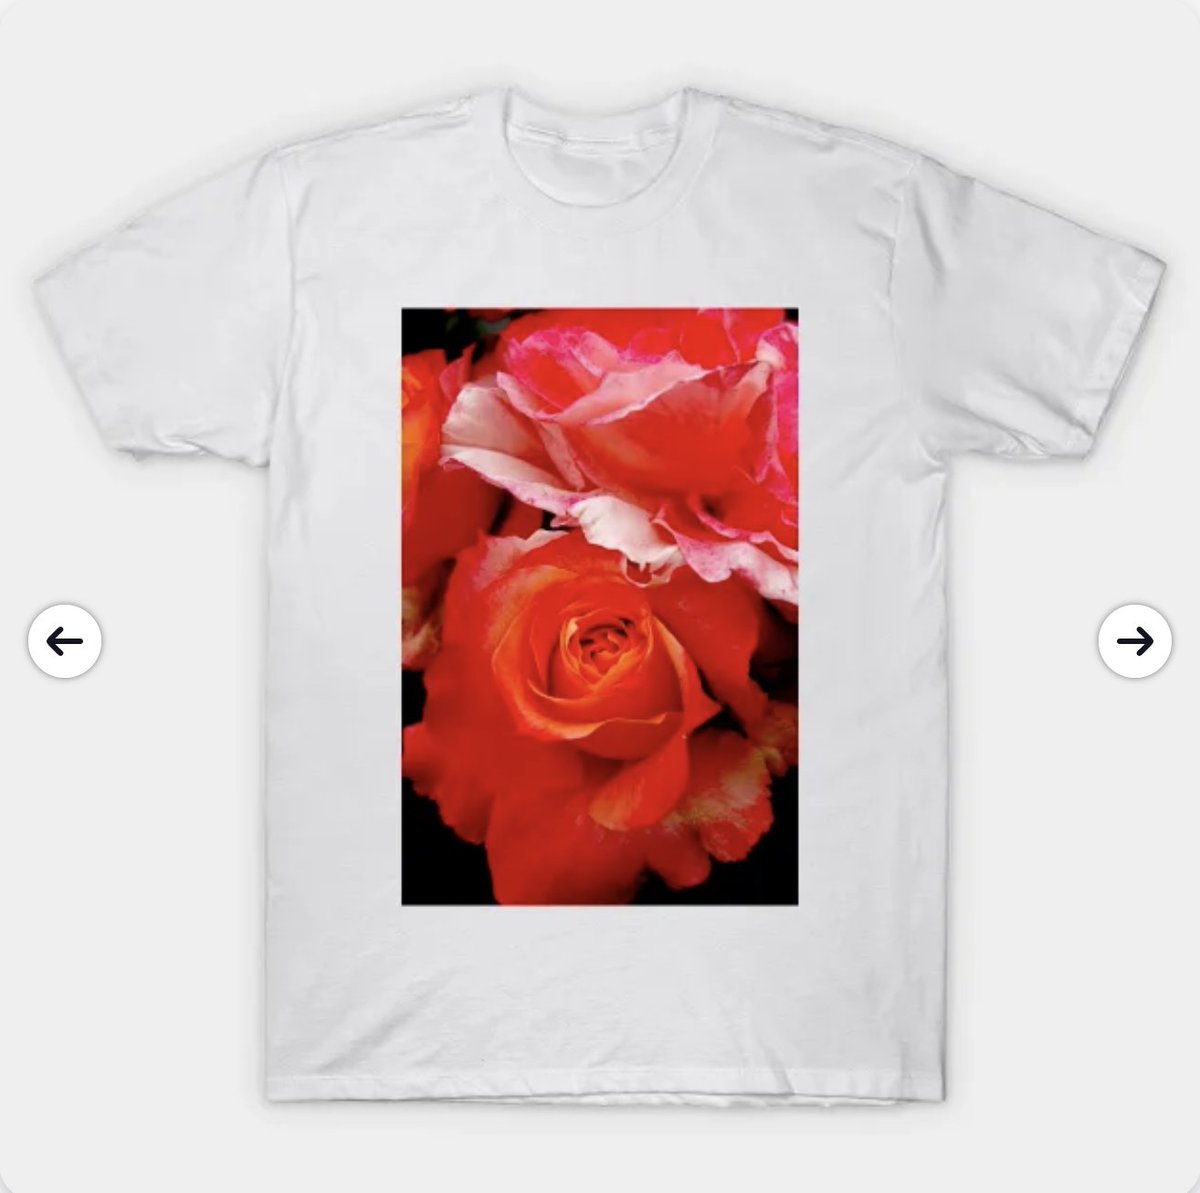 Dark Rose design on lots of stuff in my #TeePublic shop tinyurl.com/33ymrj74 and lots more designs and gift ideas here: linktr.ee/WaterGardens 🌹🌹🌹 #Redbubble #GiftIdeas #WallArt #TShirt #Roses #Flowers The Tee shown is $22.